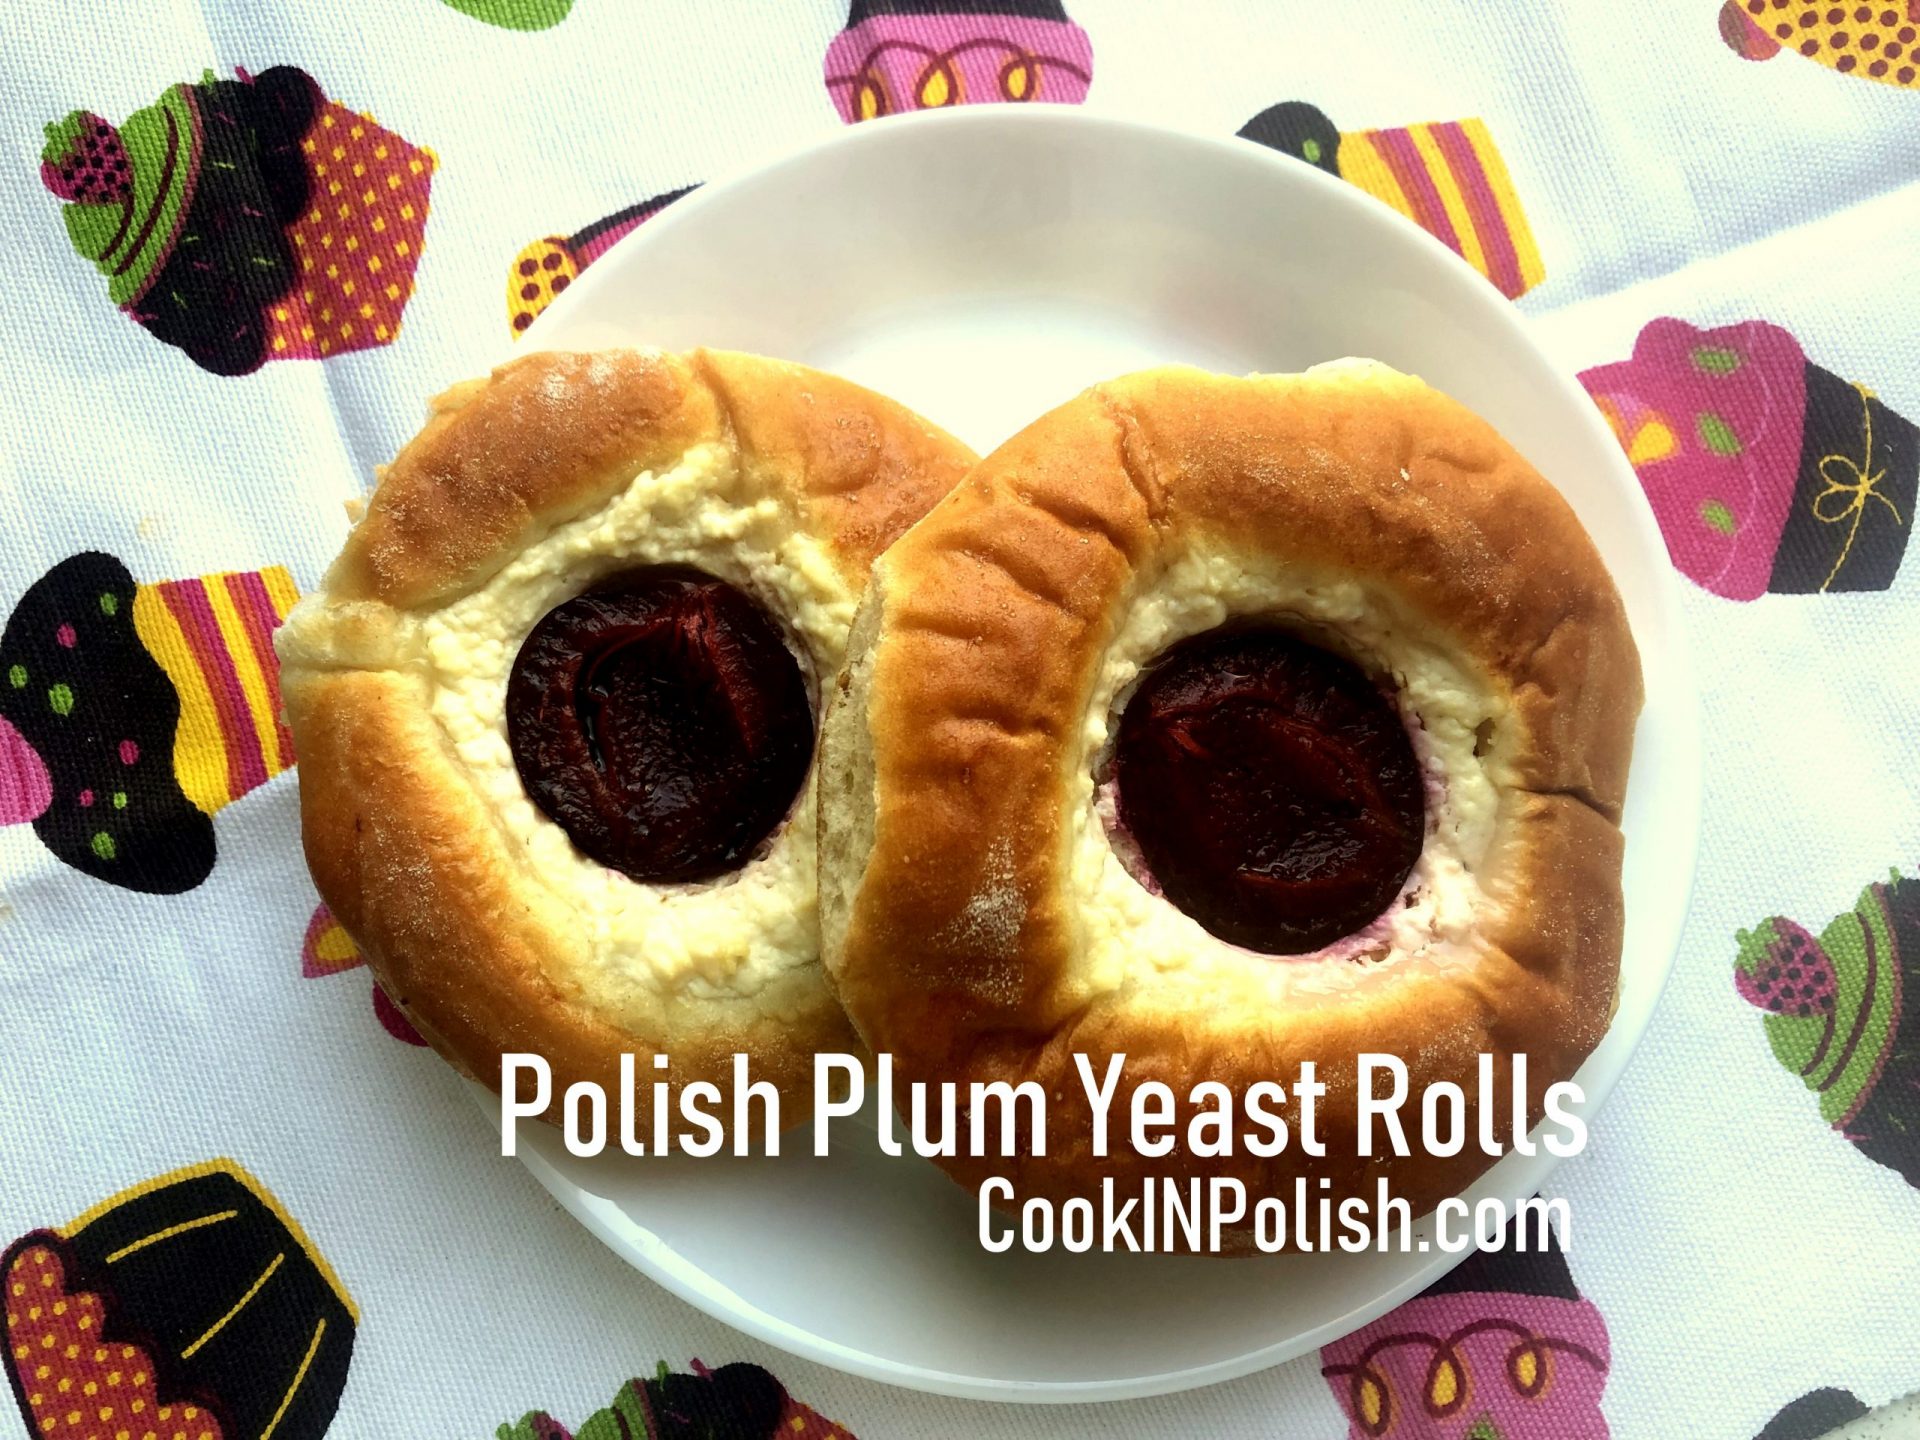 Polish Yeast Rolls with cheese and plums served on the plate.